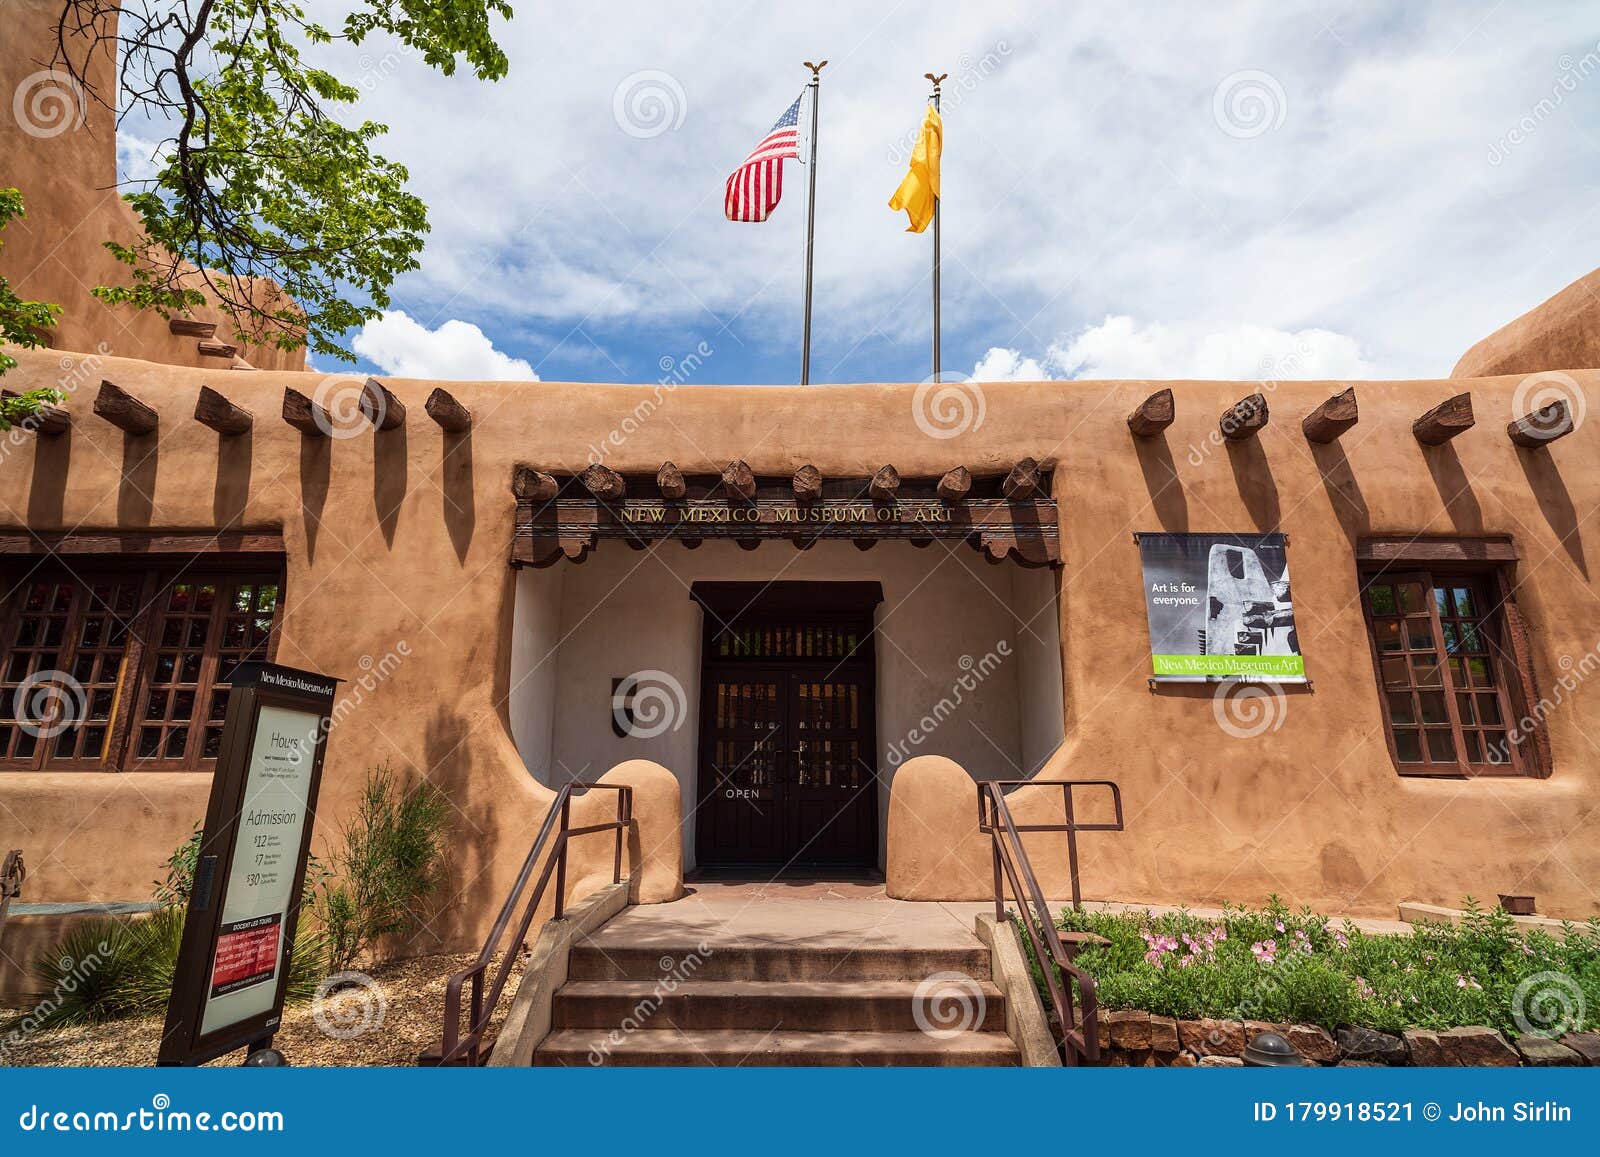 New Mexico Museum of Art in Santa Fe, NM Editorial Photo - Image of